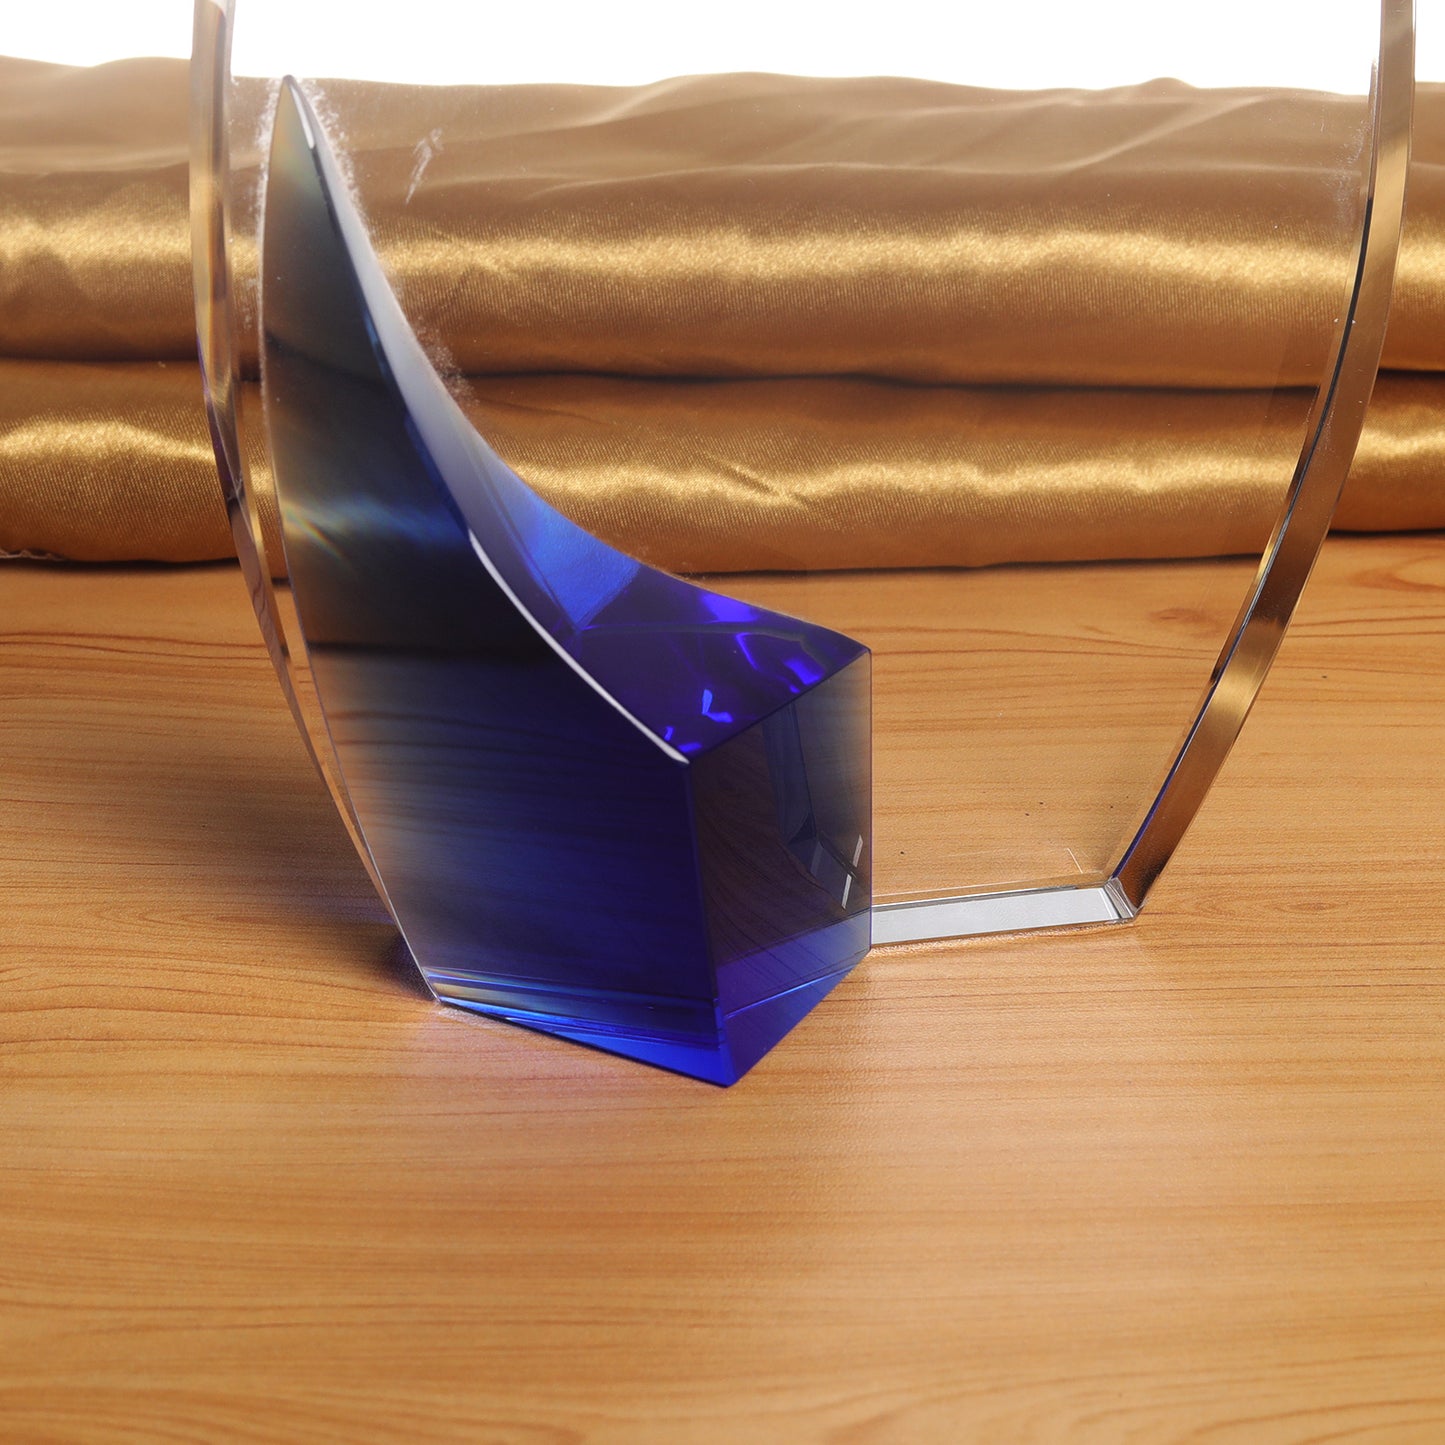 JNCT-202 Longwin Smooth Sailing Crystal Trophy